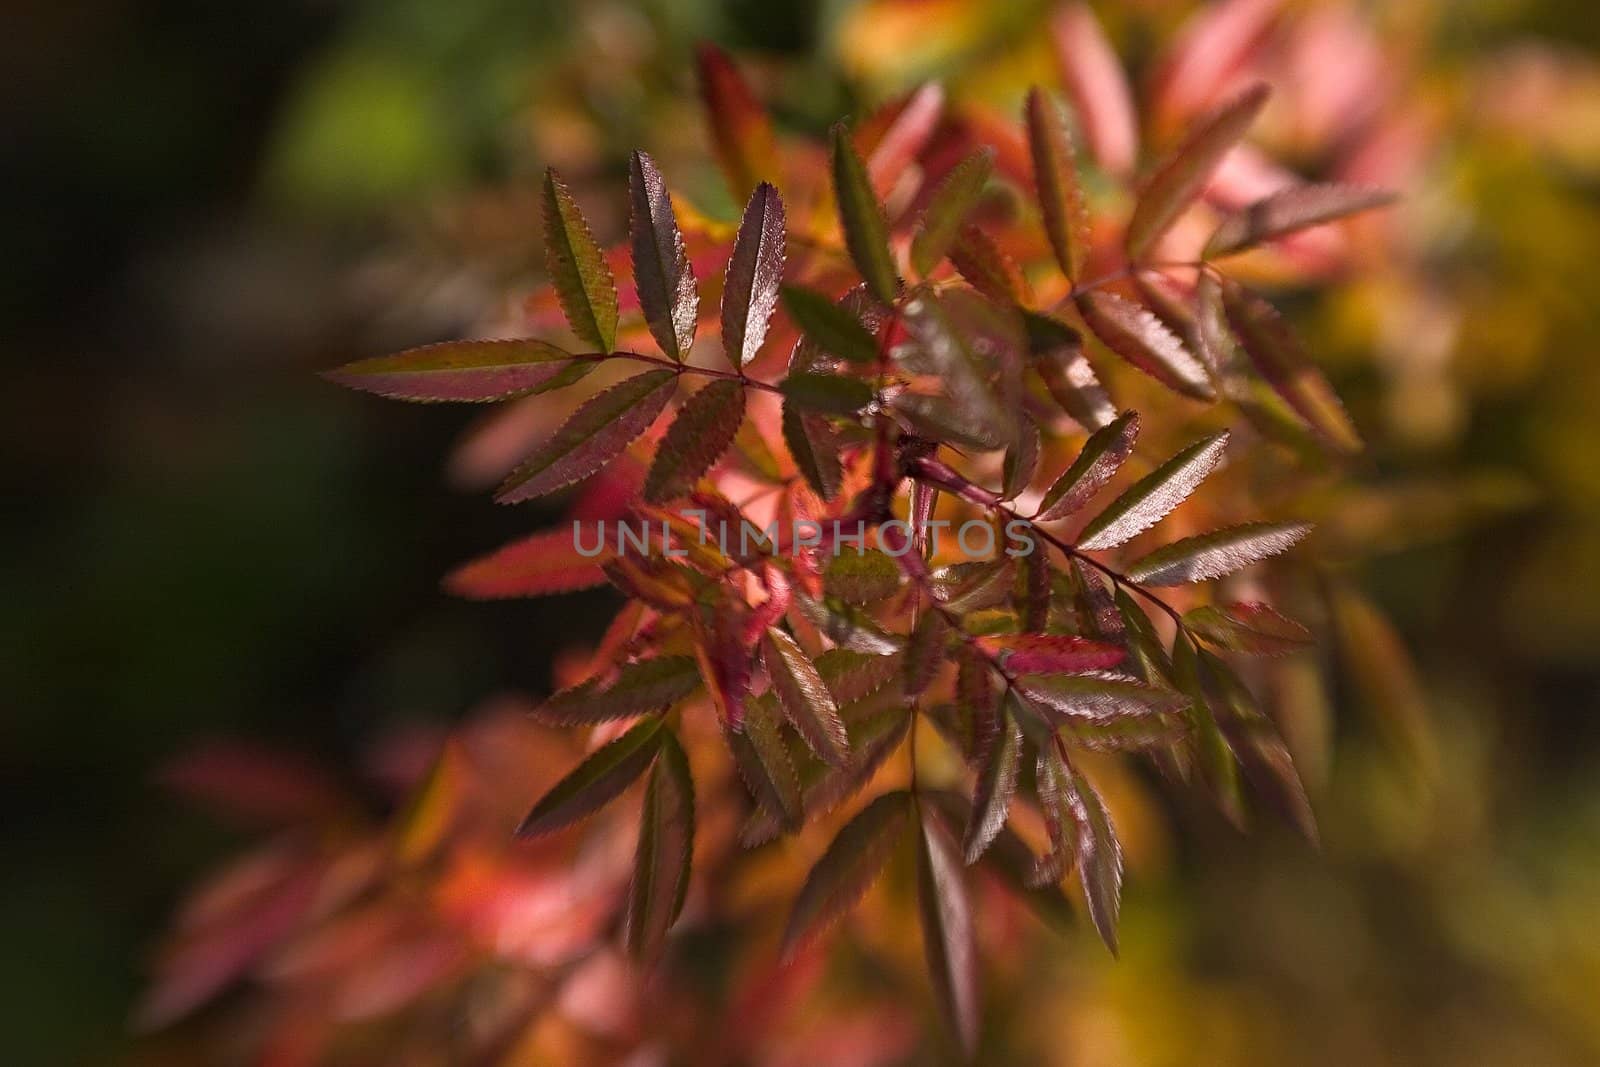 beautiful color effect of the blurred background lensbaby